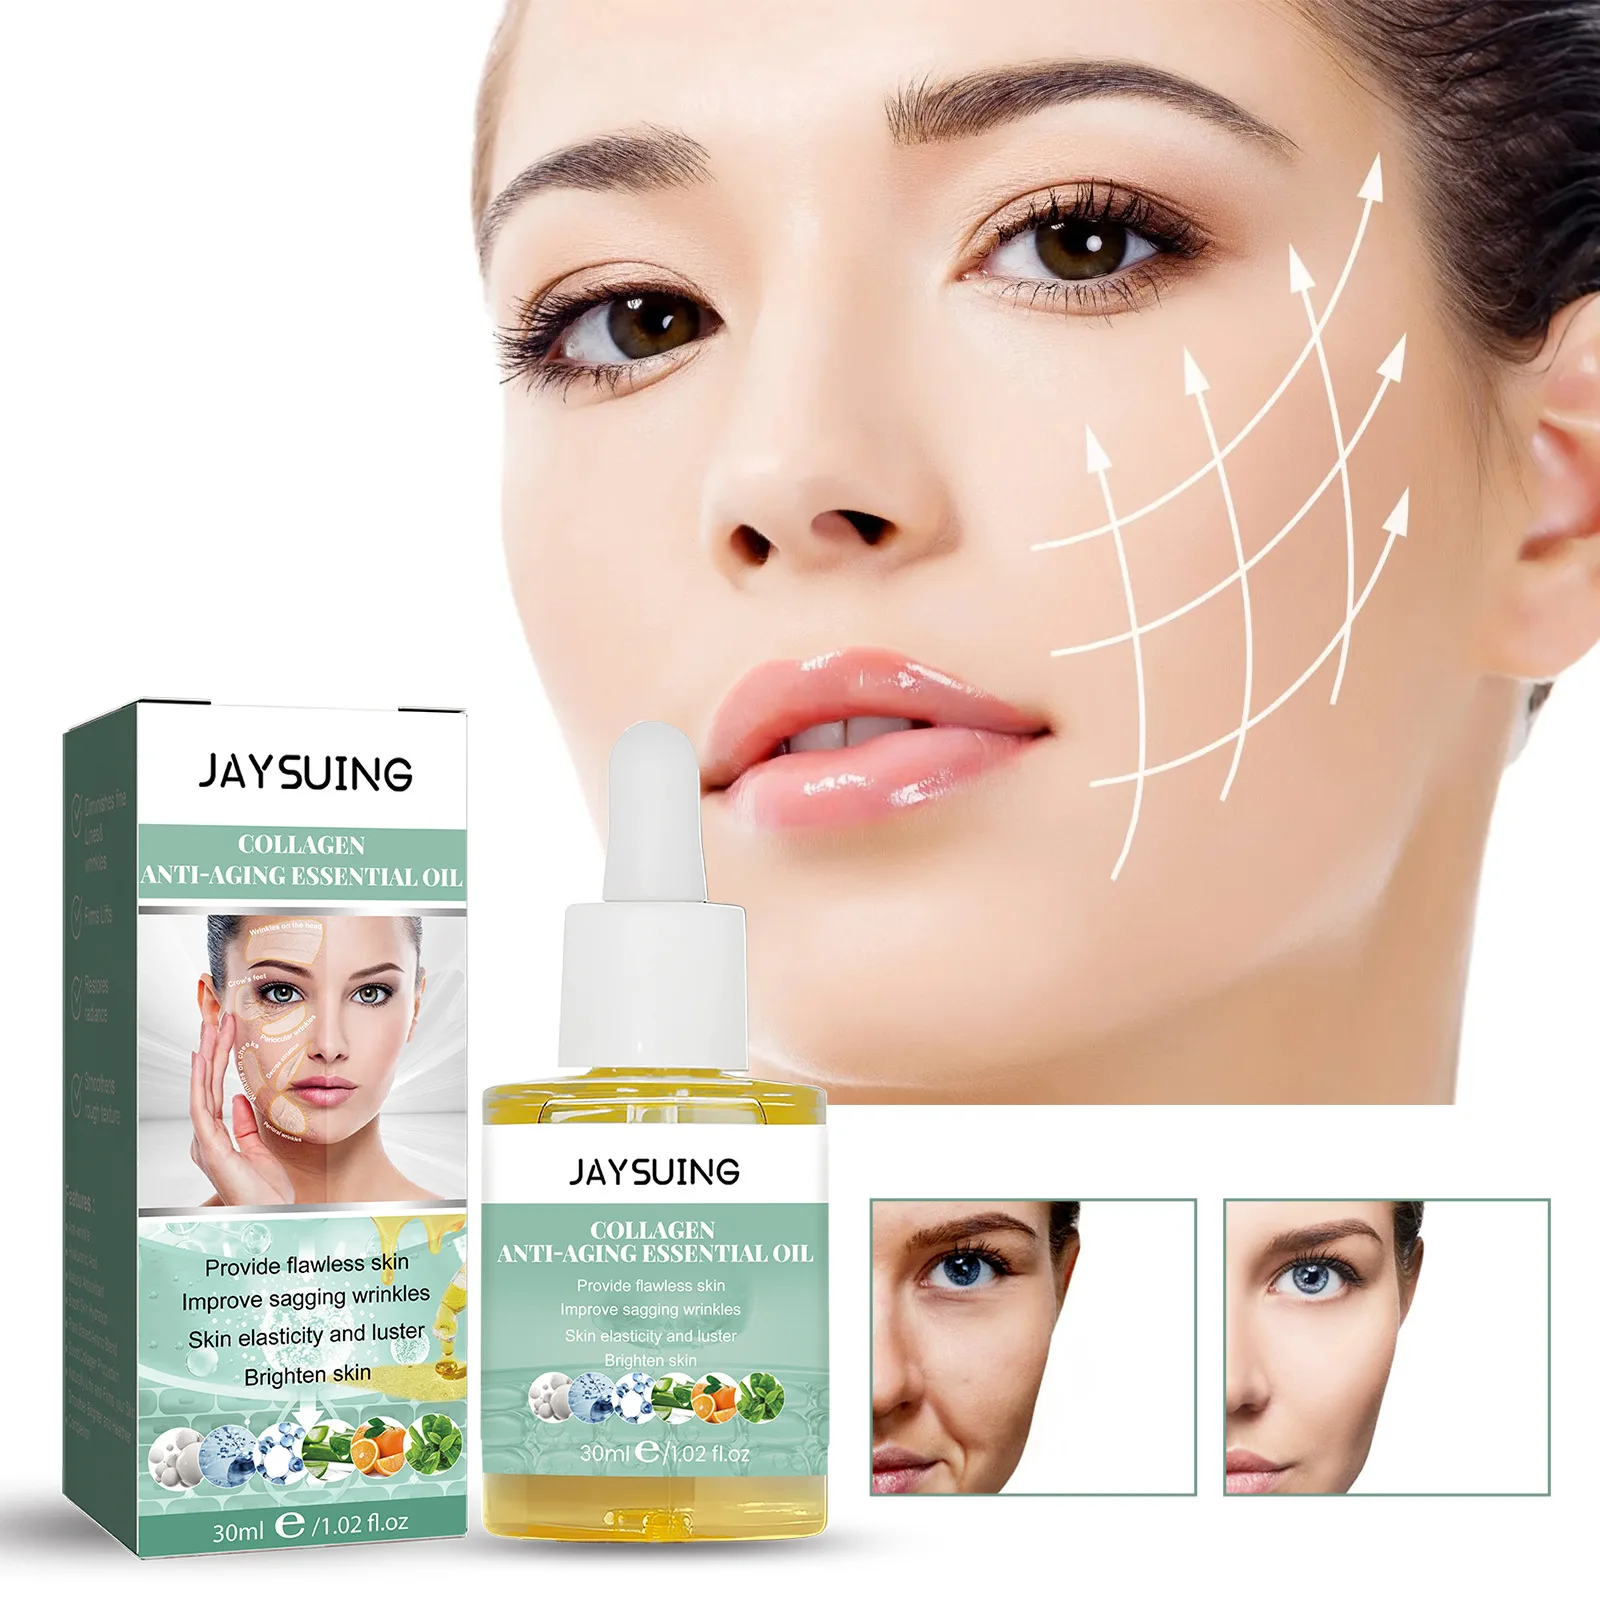 Collagen Instant Wrinkle Remover Face Serum Anti Aging Lifting Firming Fade Fine Lines Essence Whitening Brighten Skin Care 30ml